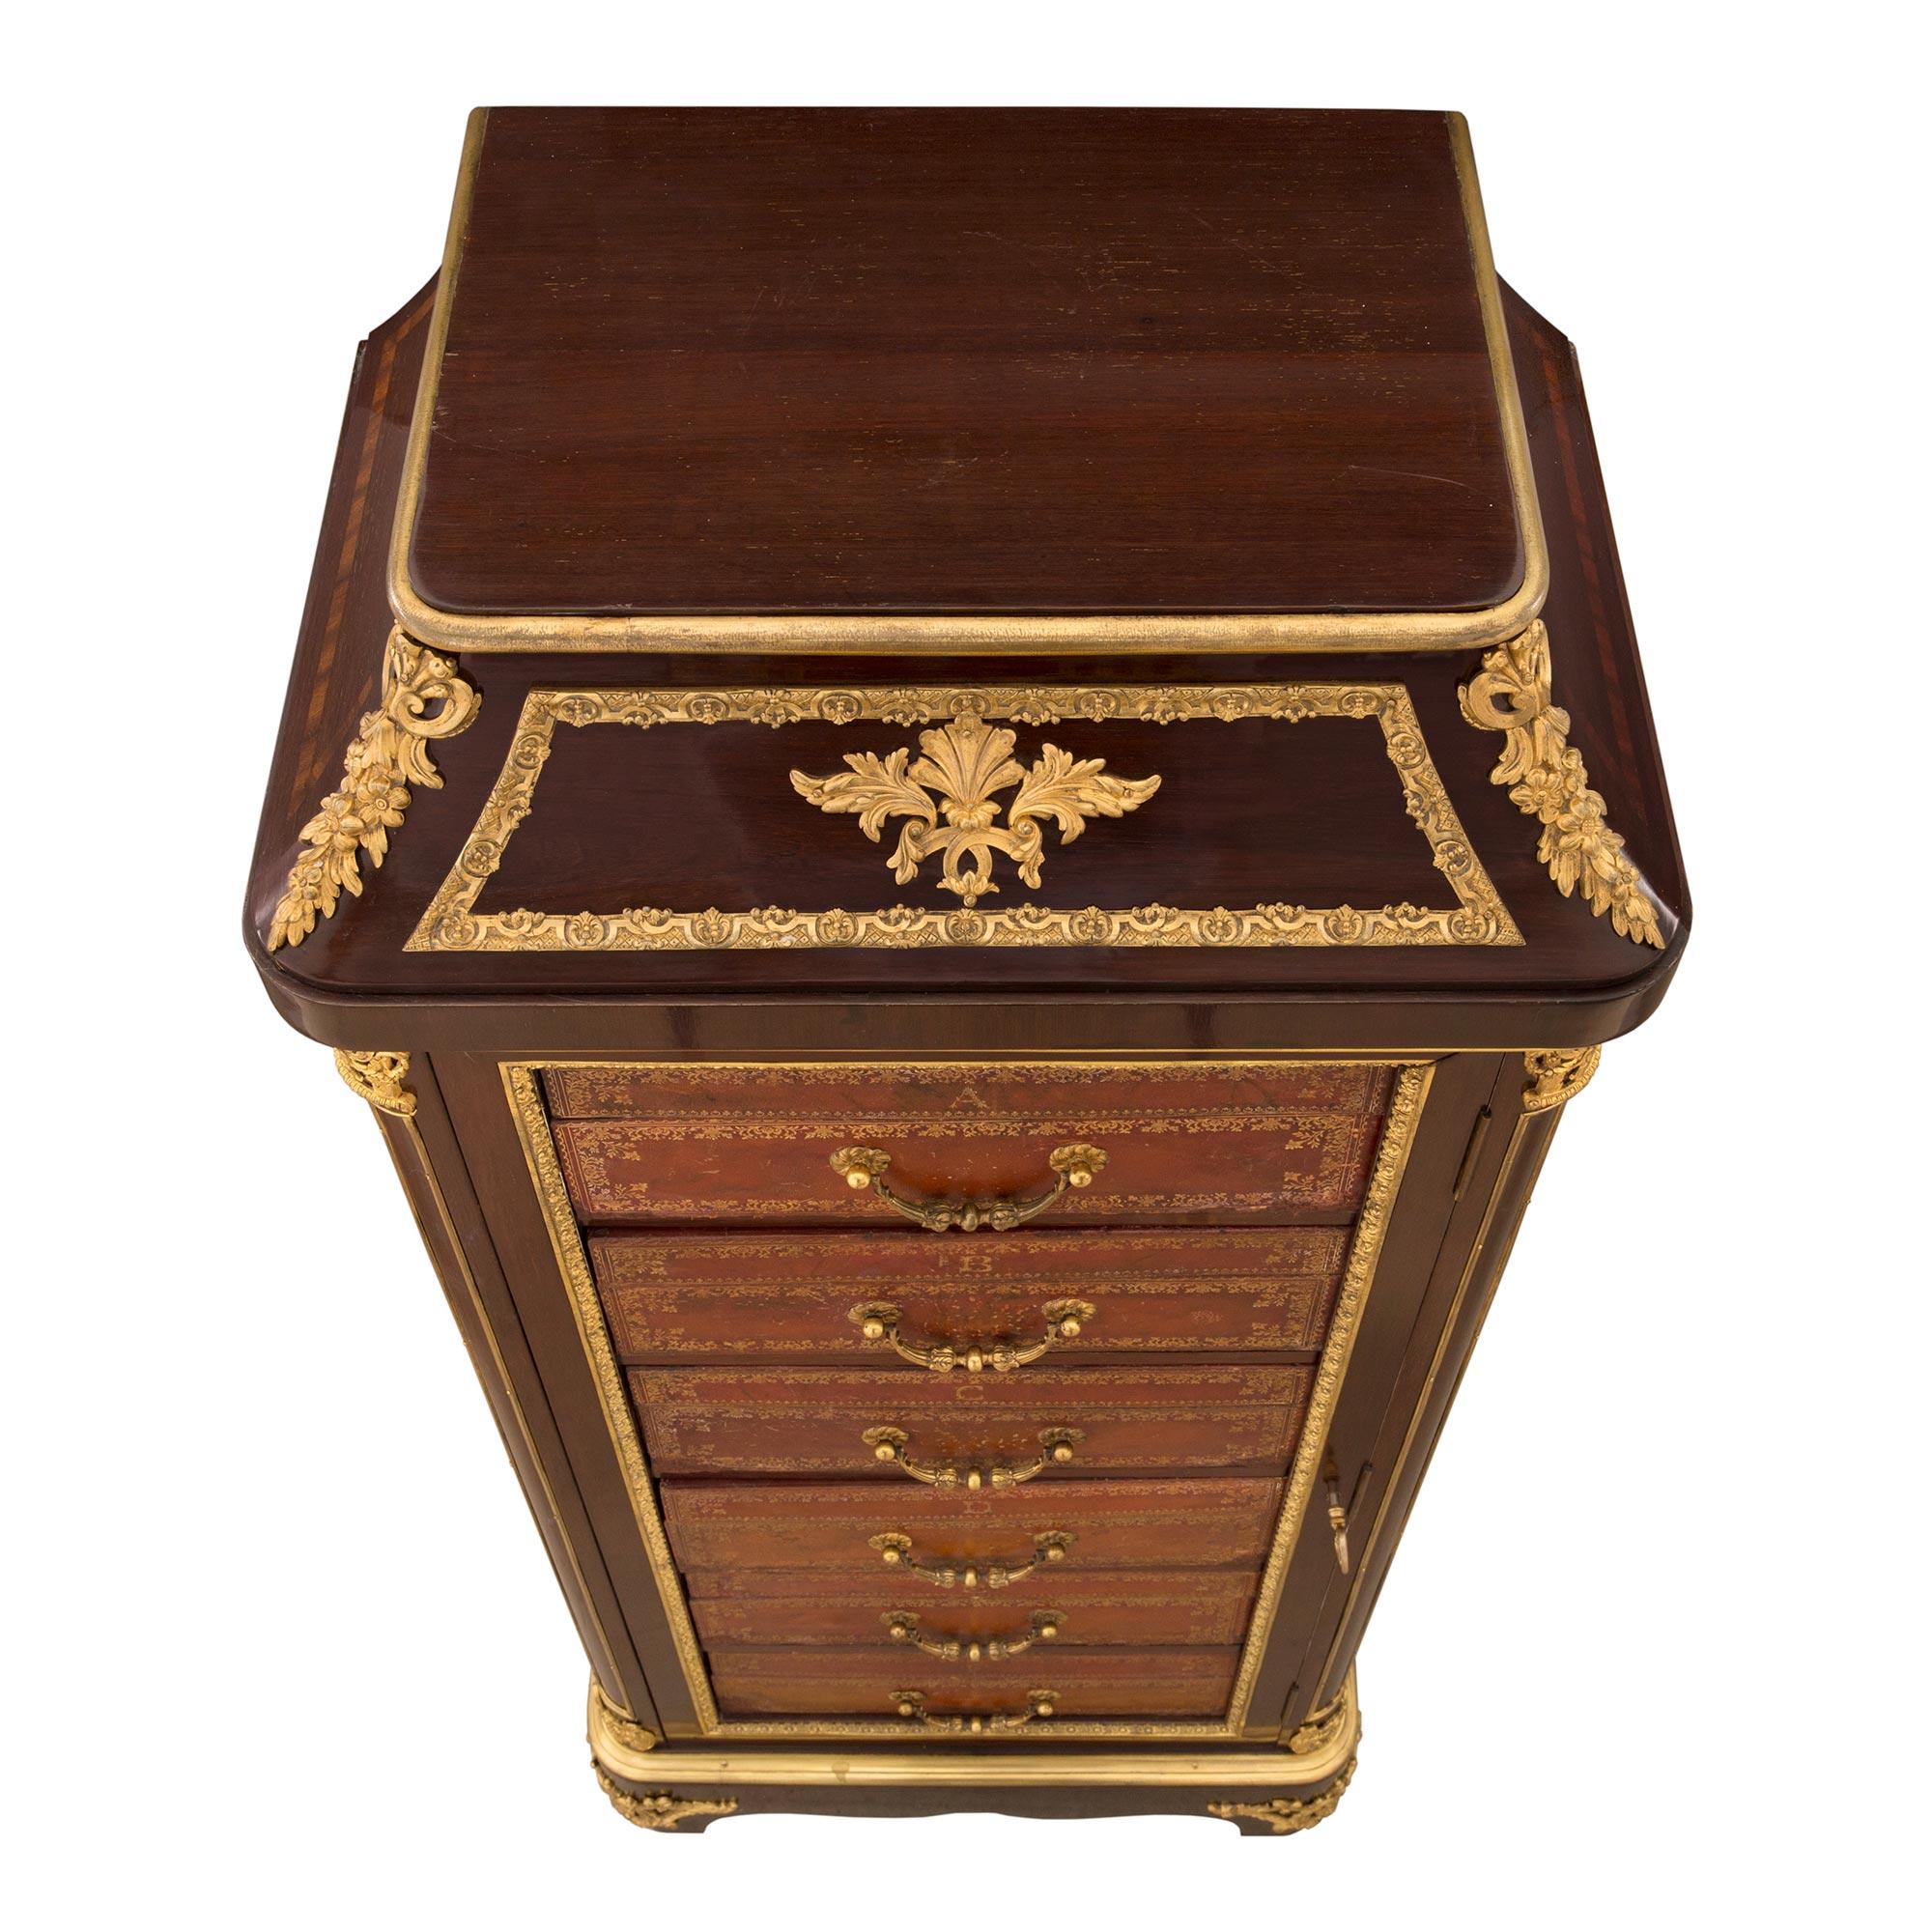 A sensational and high quality French 19th century Louis XVI st. mahogany, ormolu and leather cartonnier, signed 